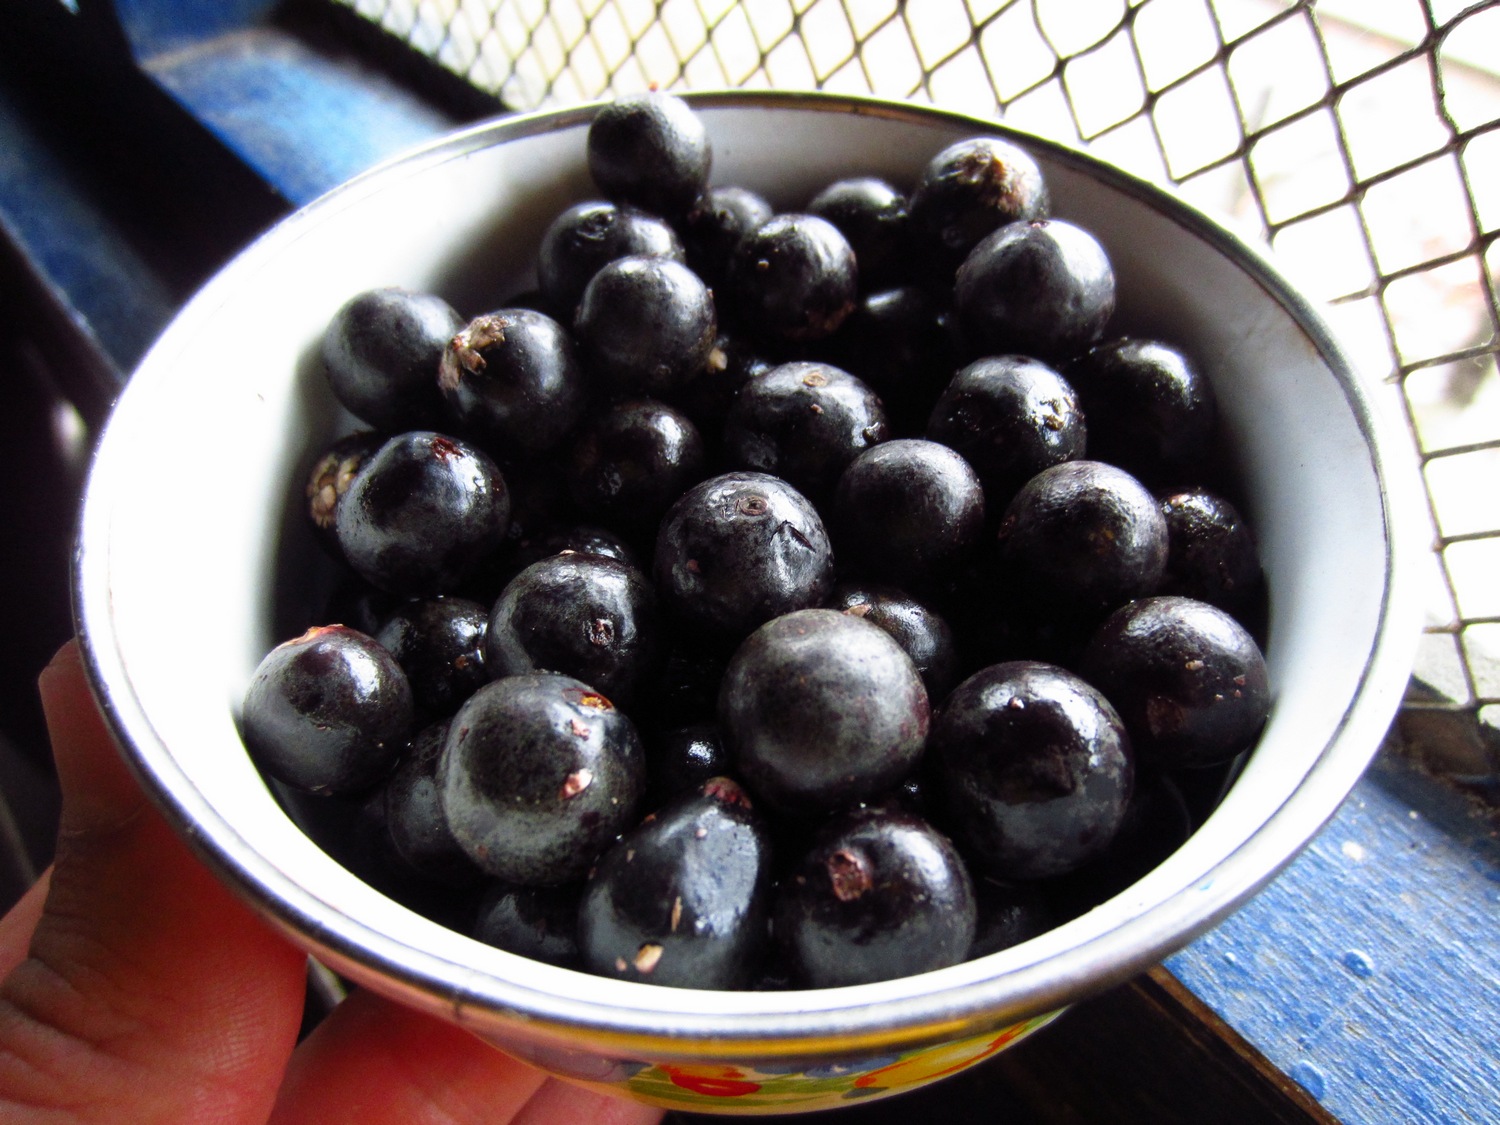 Got back on the boat and cruised over to Peru on the other side of the river. We stopped for lunch in Bista Alegre. Got back on the boat and cruised over to Peru on the other side of the river. We stopped for lunch in Bista Alegre. These are Acai Berries.